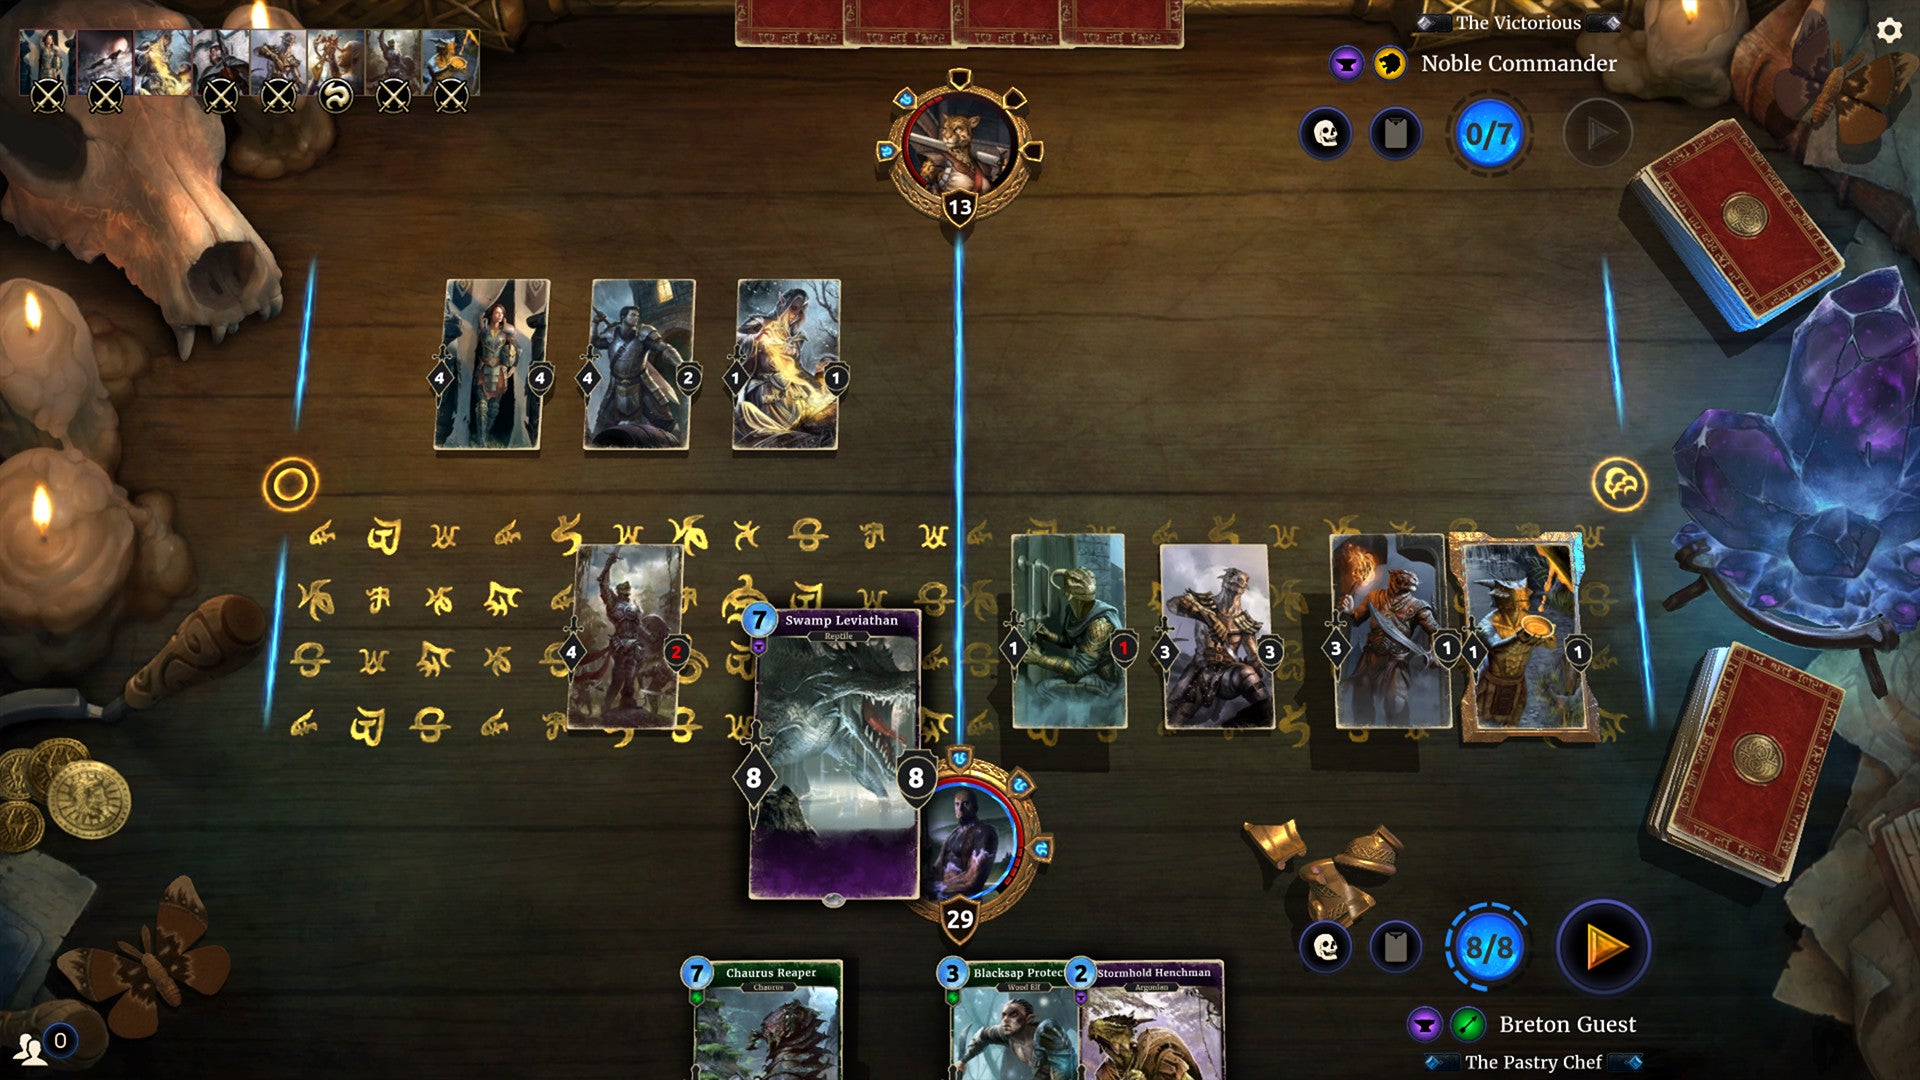 Image for Elder Scrolls Legends development "on hold for the foreseeable future"